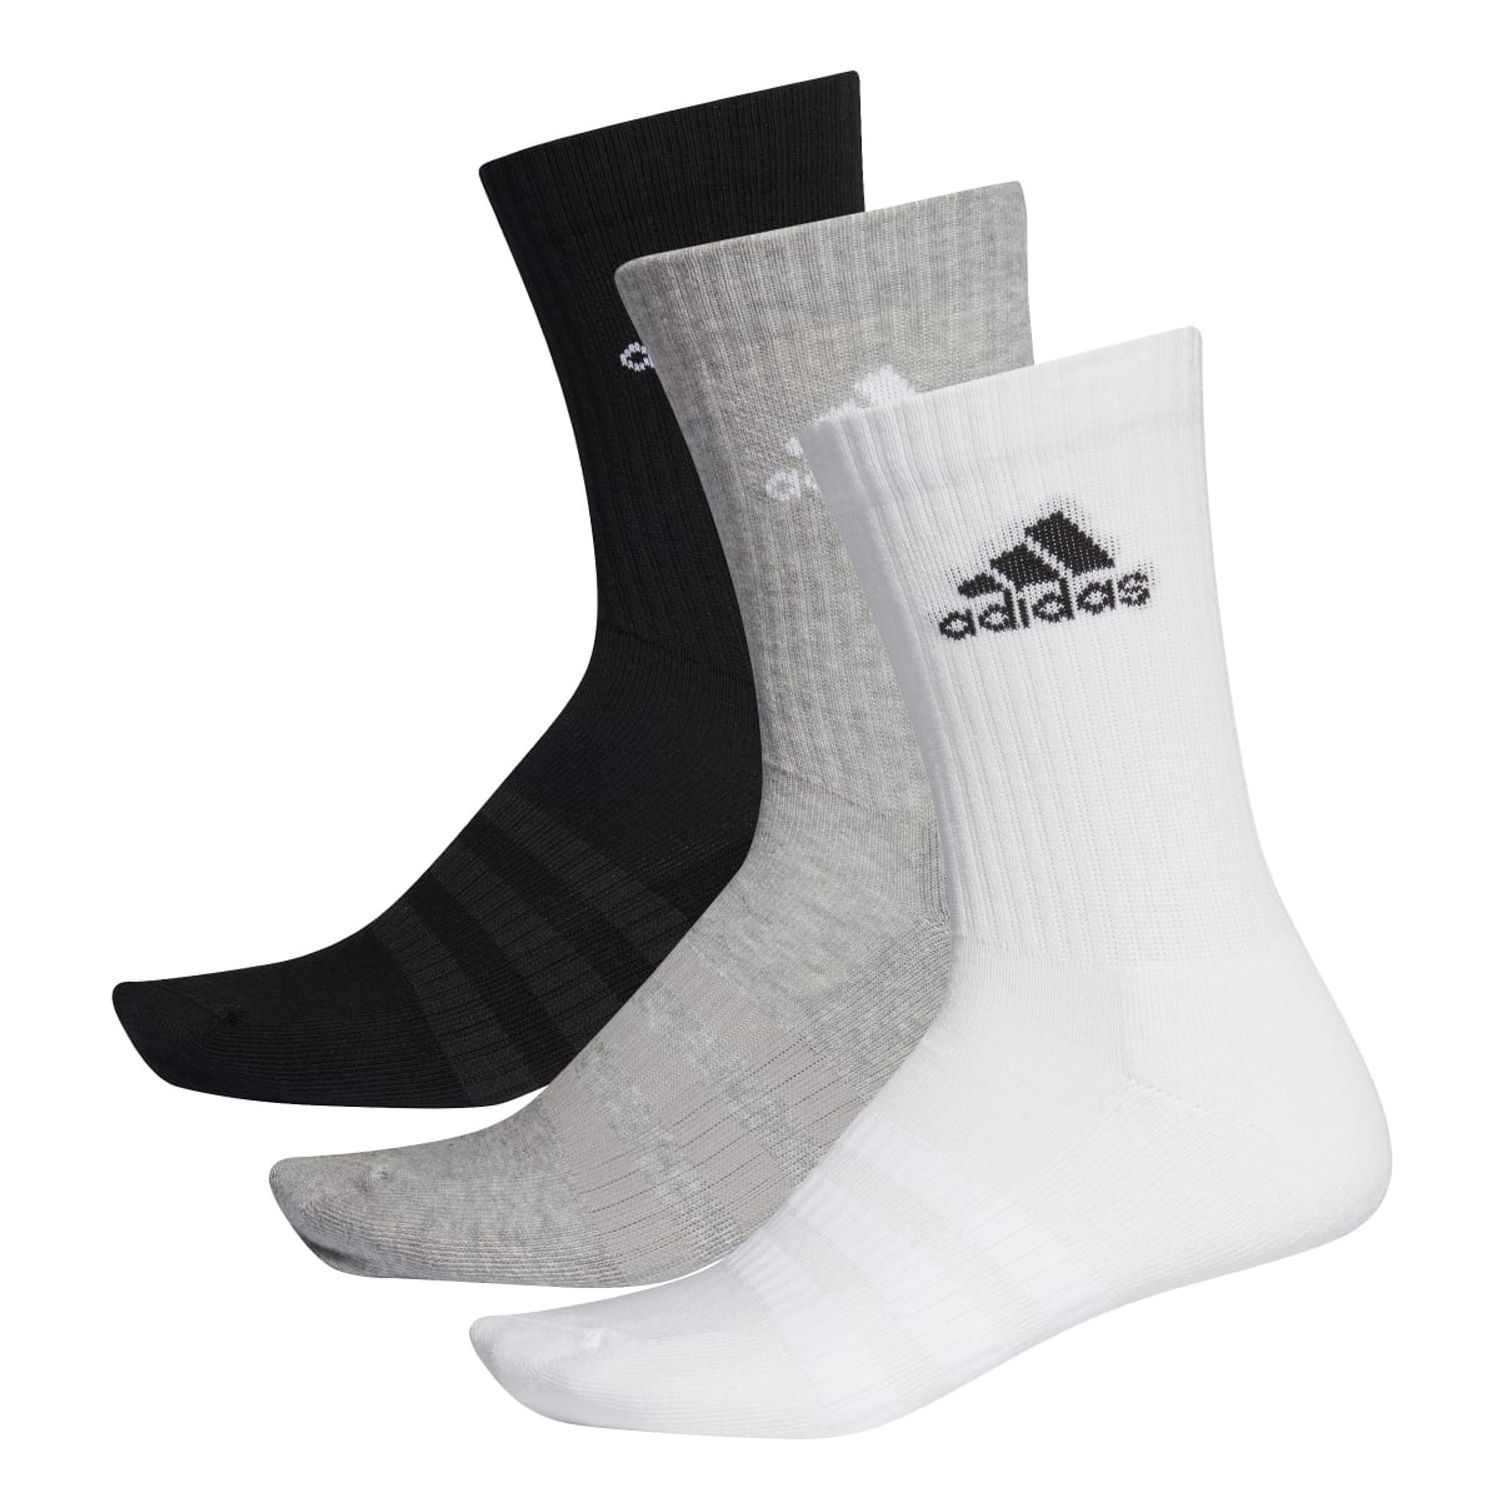 Black Grey White adidas 3-Pack Cushioned Crew Socks - Get The Label